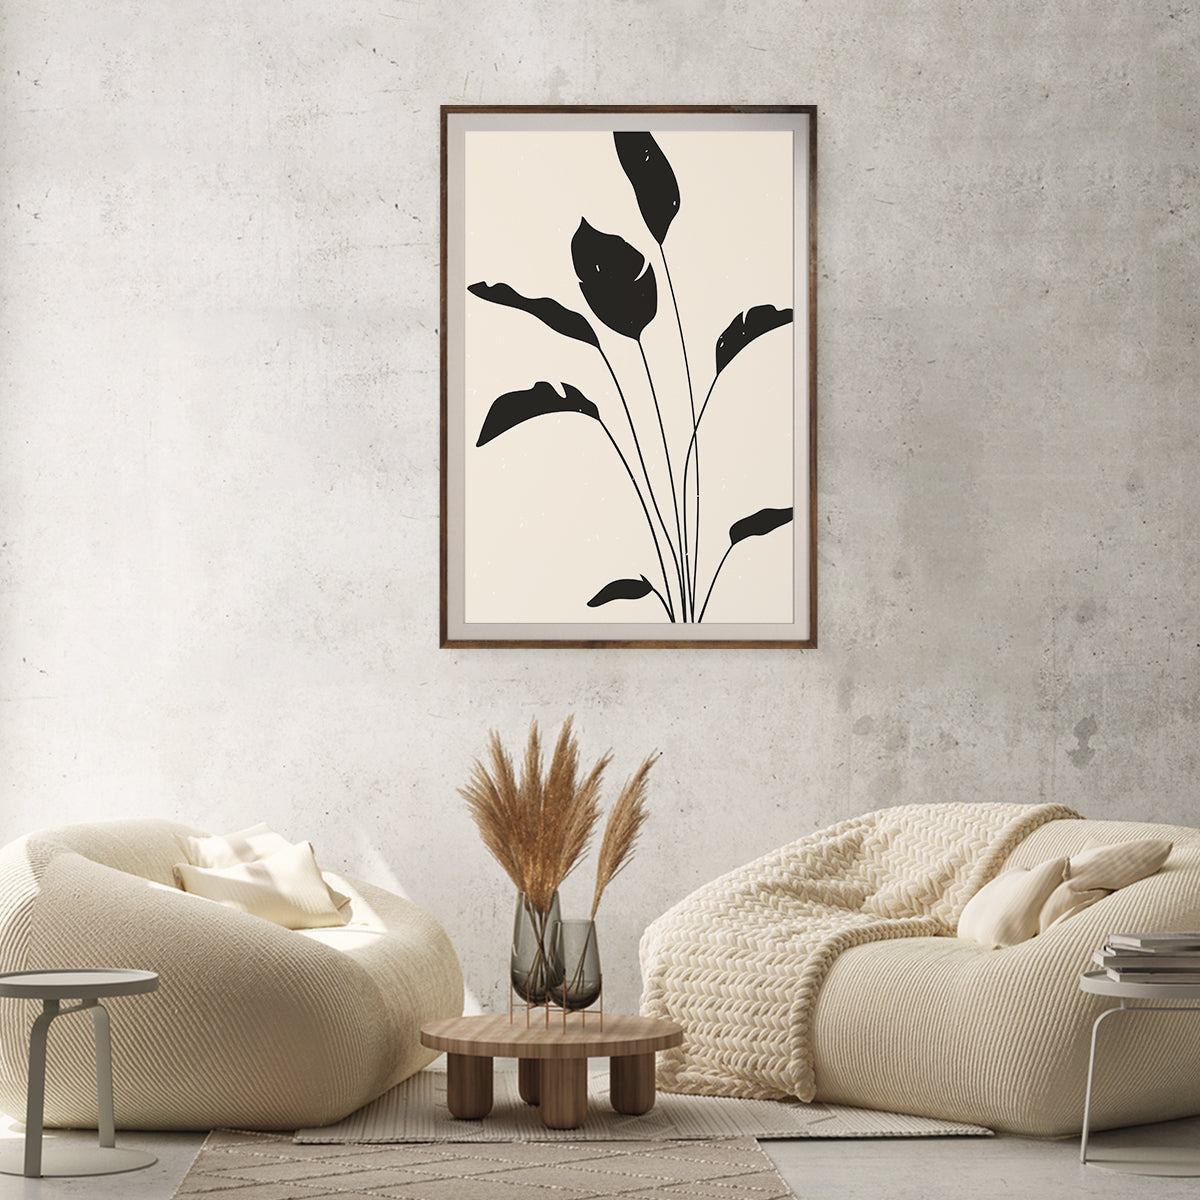 Monochrome Plant Silhouette Posters For Living Room Wall-Vertical Posters NOT FRAMED-CetArt-8″x10″ inches-CetArt